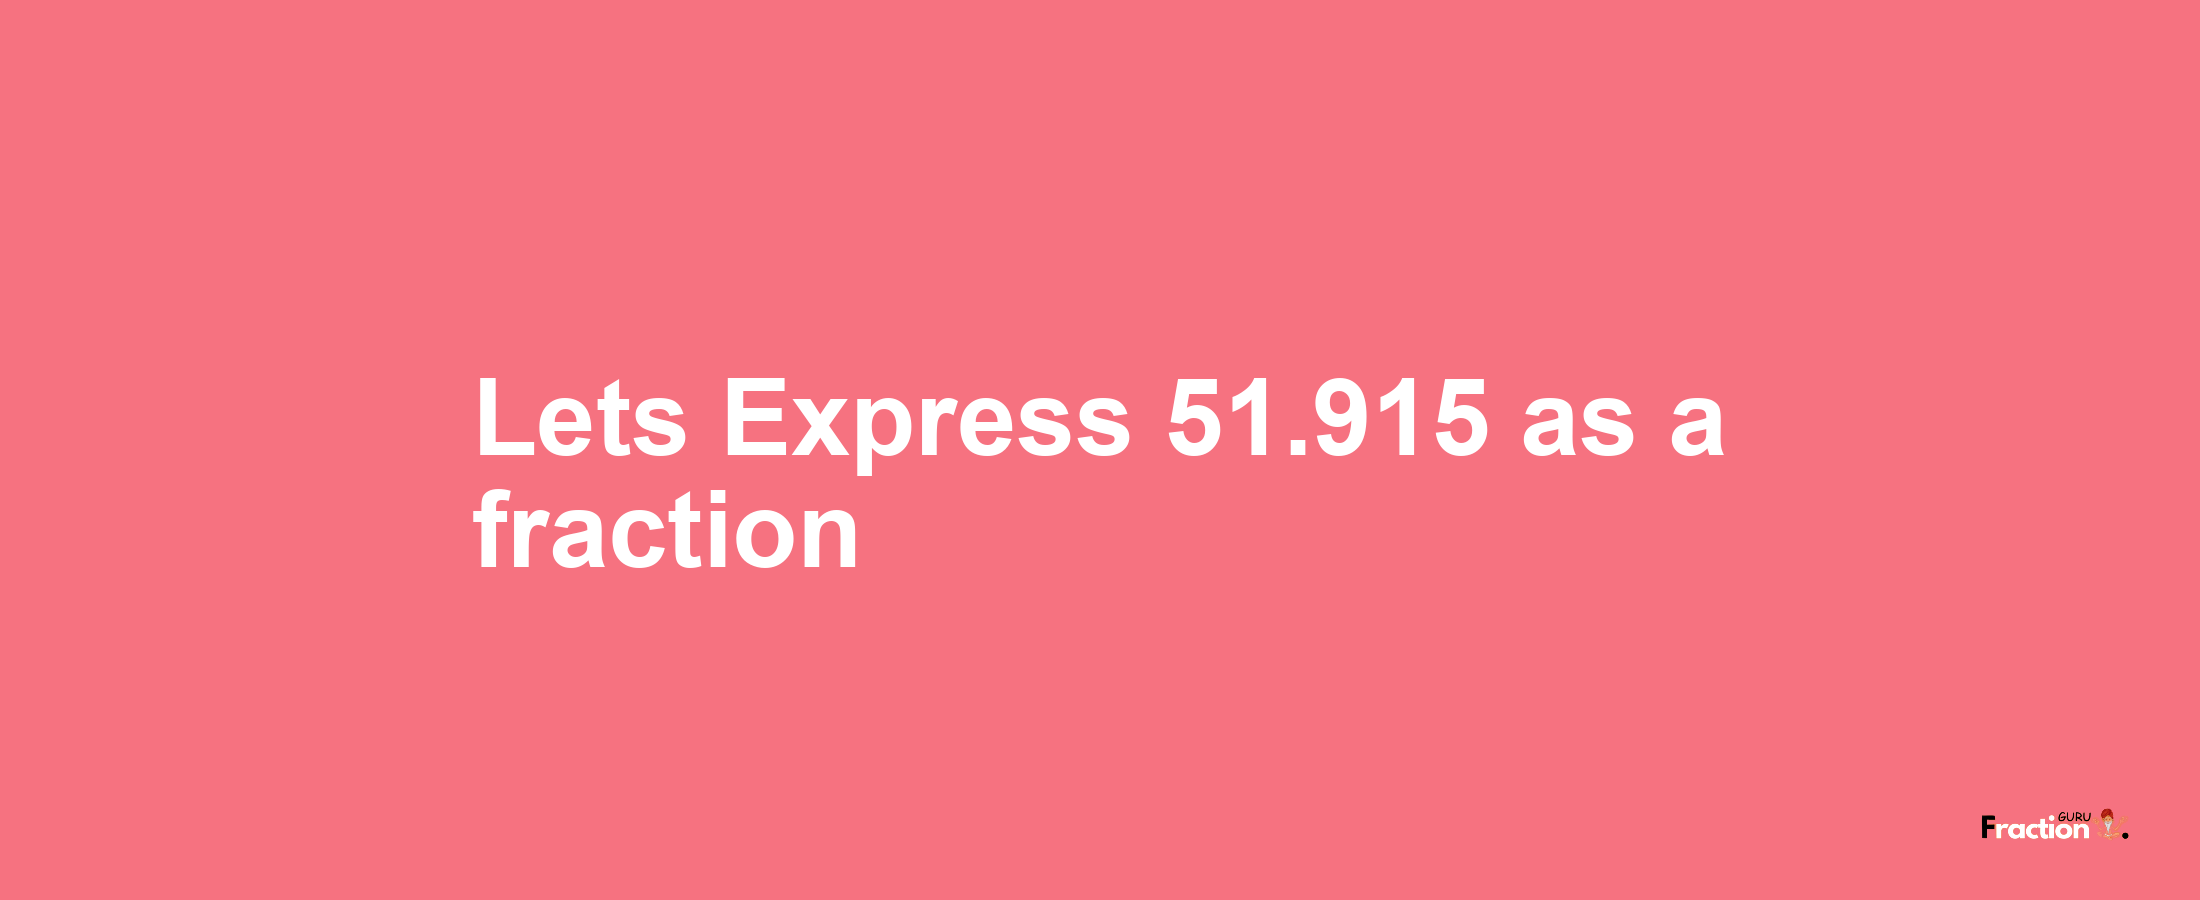 Lets Express 51.915 as afraction